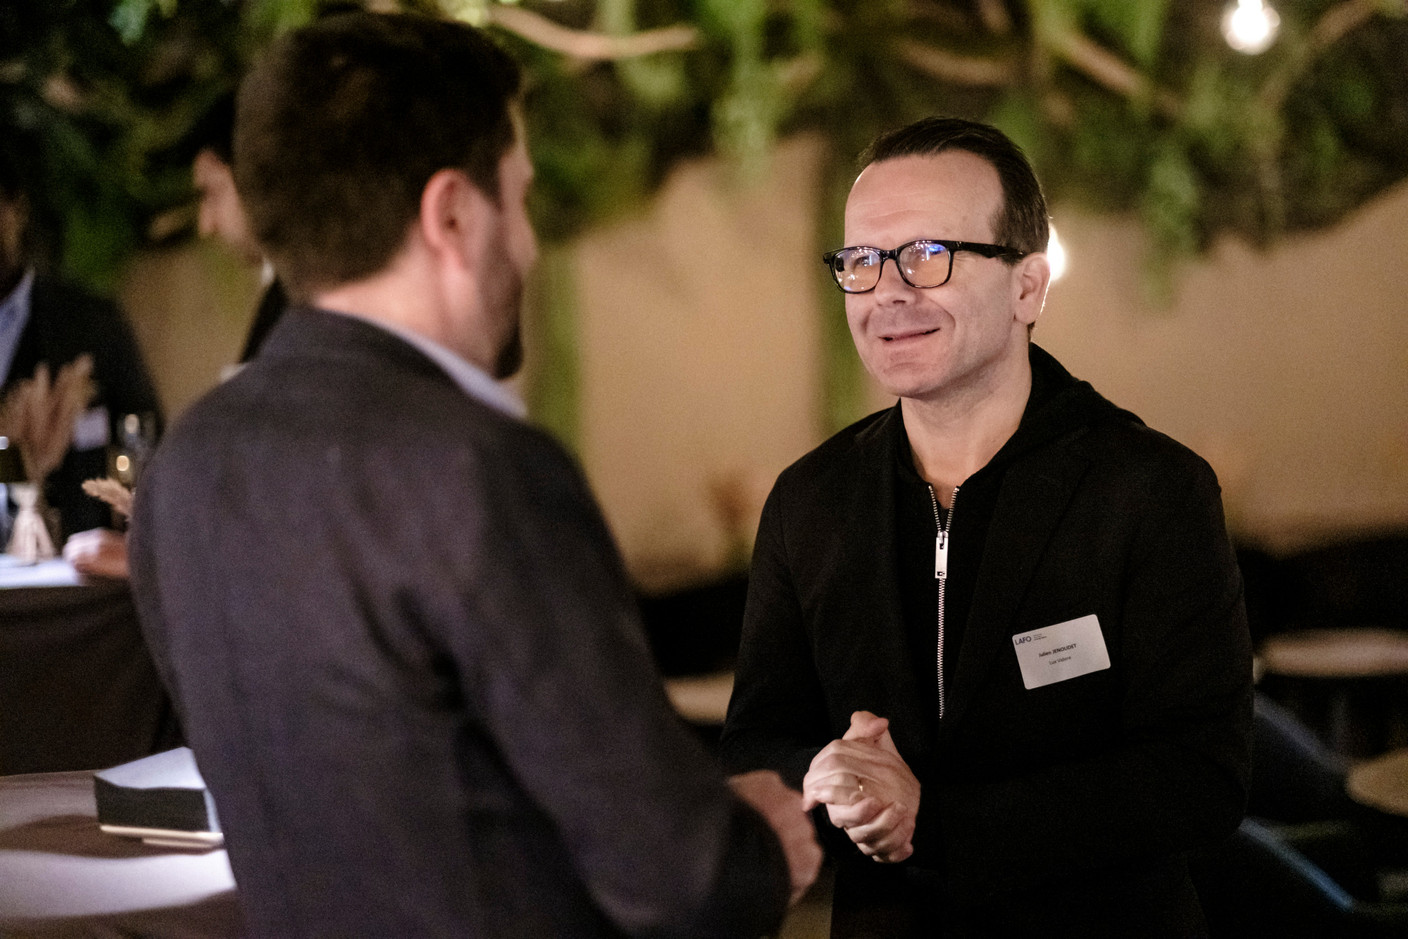 Julien Jenoudet (Lux Videre) at the Luxembourg Association of Family Offices (LAFO) winter 2023 cocktail, which took place on 8 February 2023 at Hertz PopUp. Photo: Jan Hanrion for LAFO